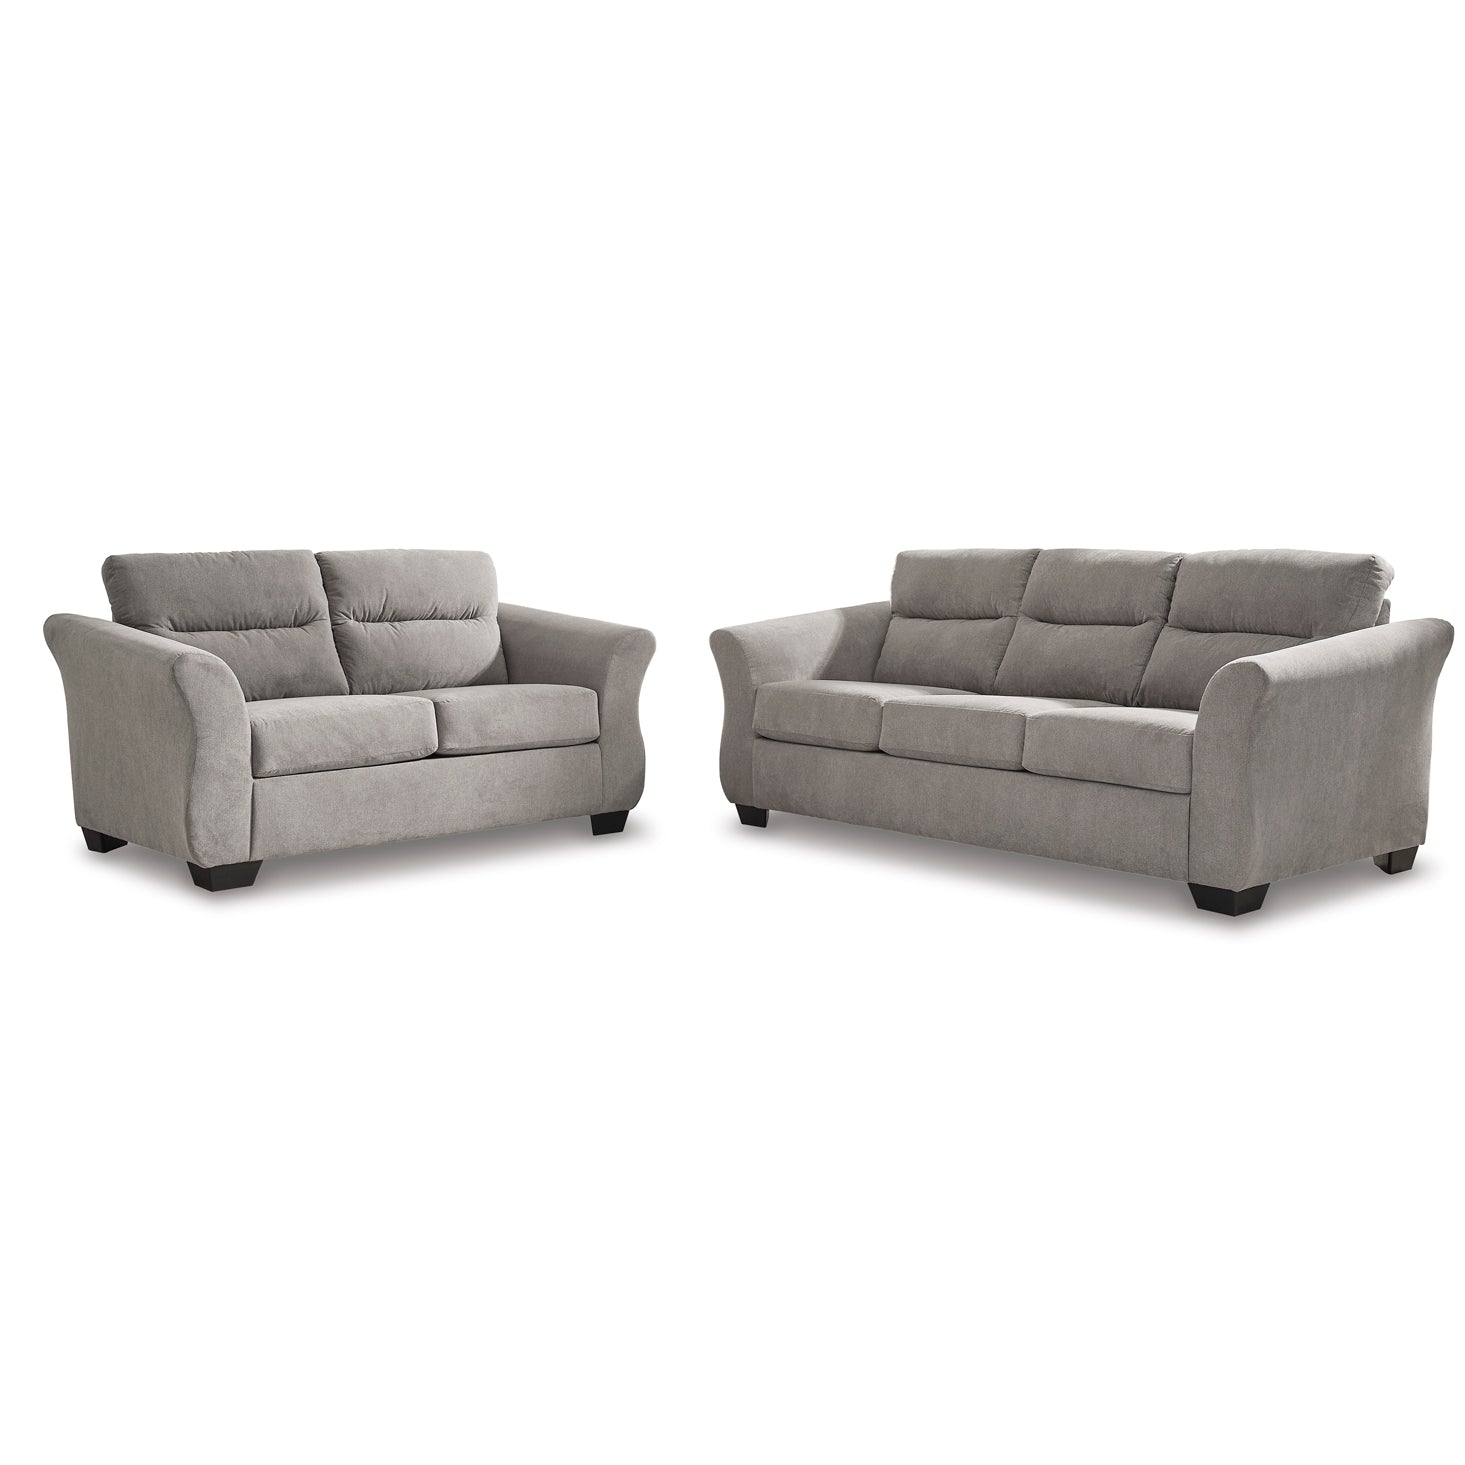 Miravel Sofa and Loveseat in Slate Color